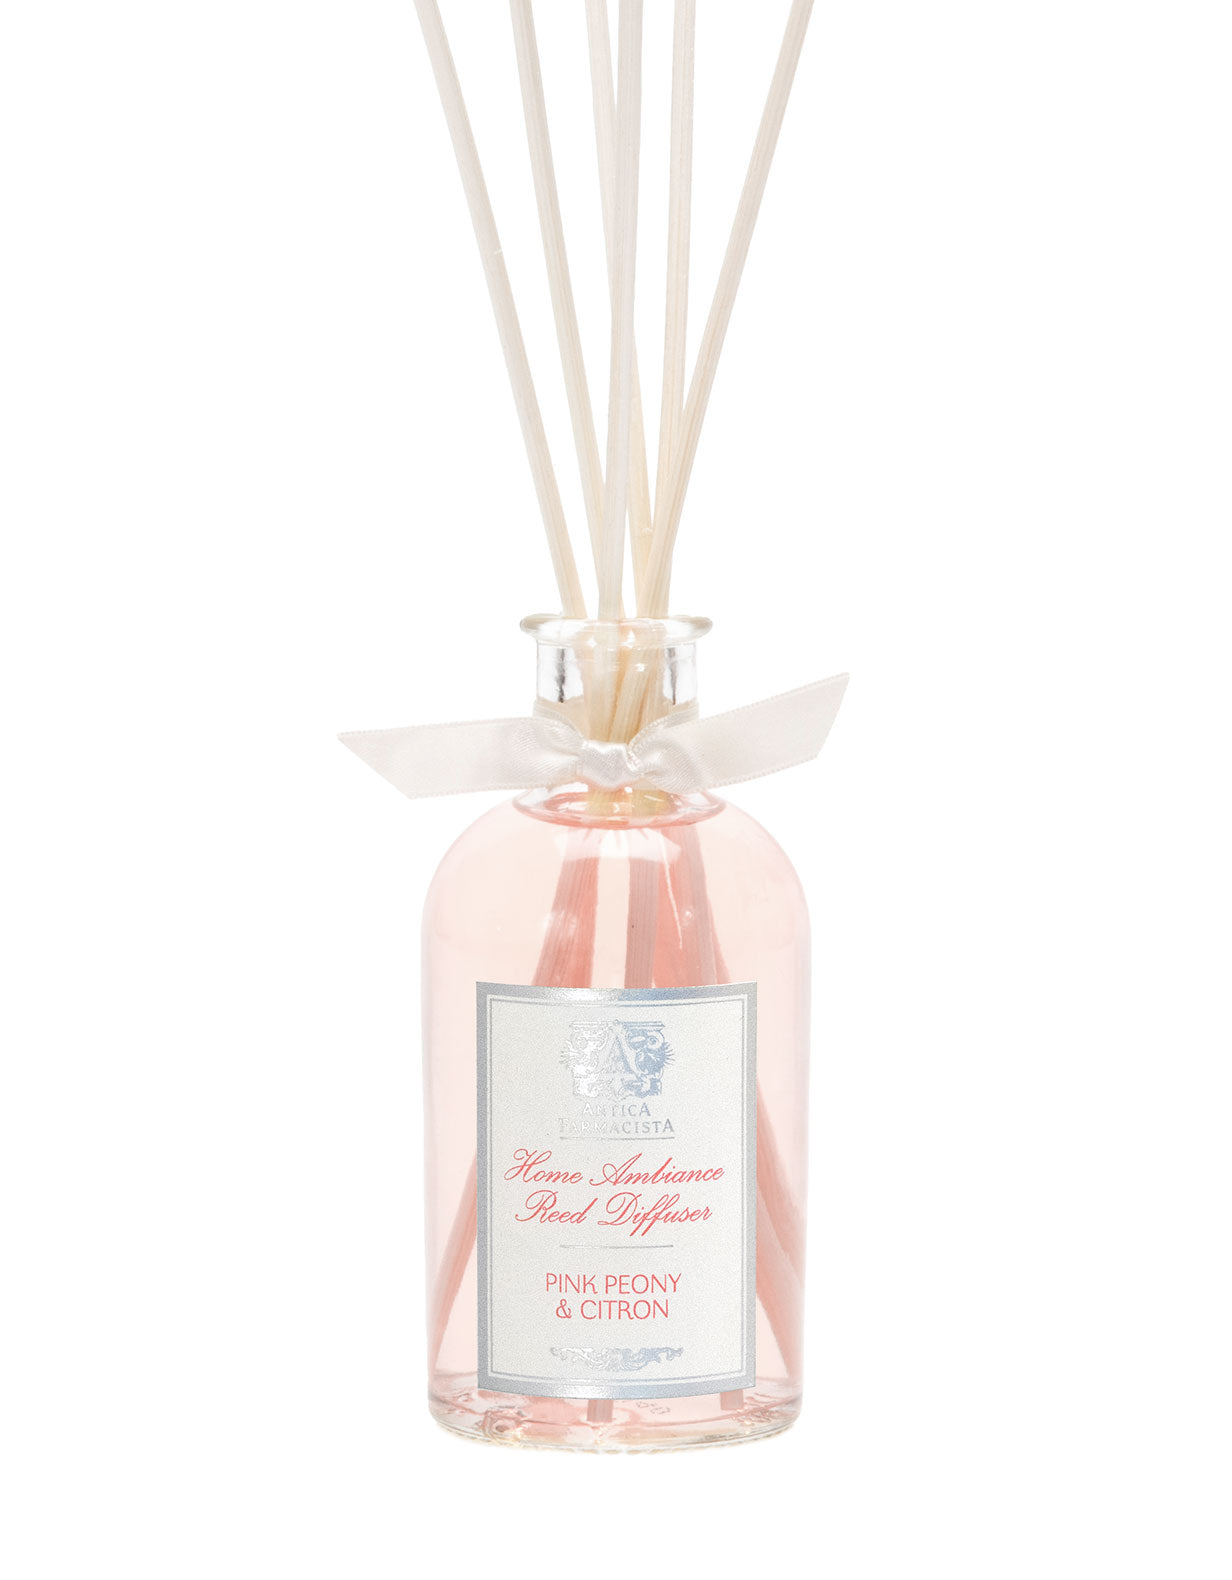 100ml Pink Peony & Citron Reed Diffuser